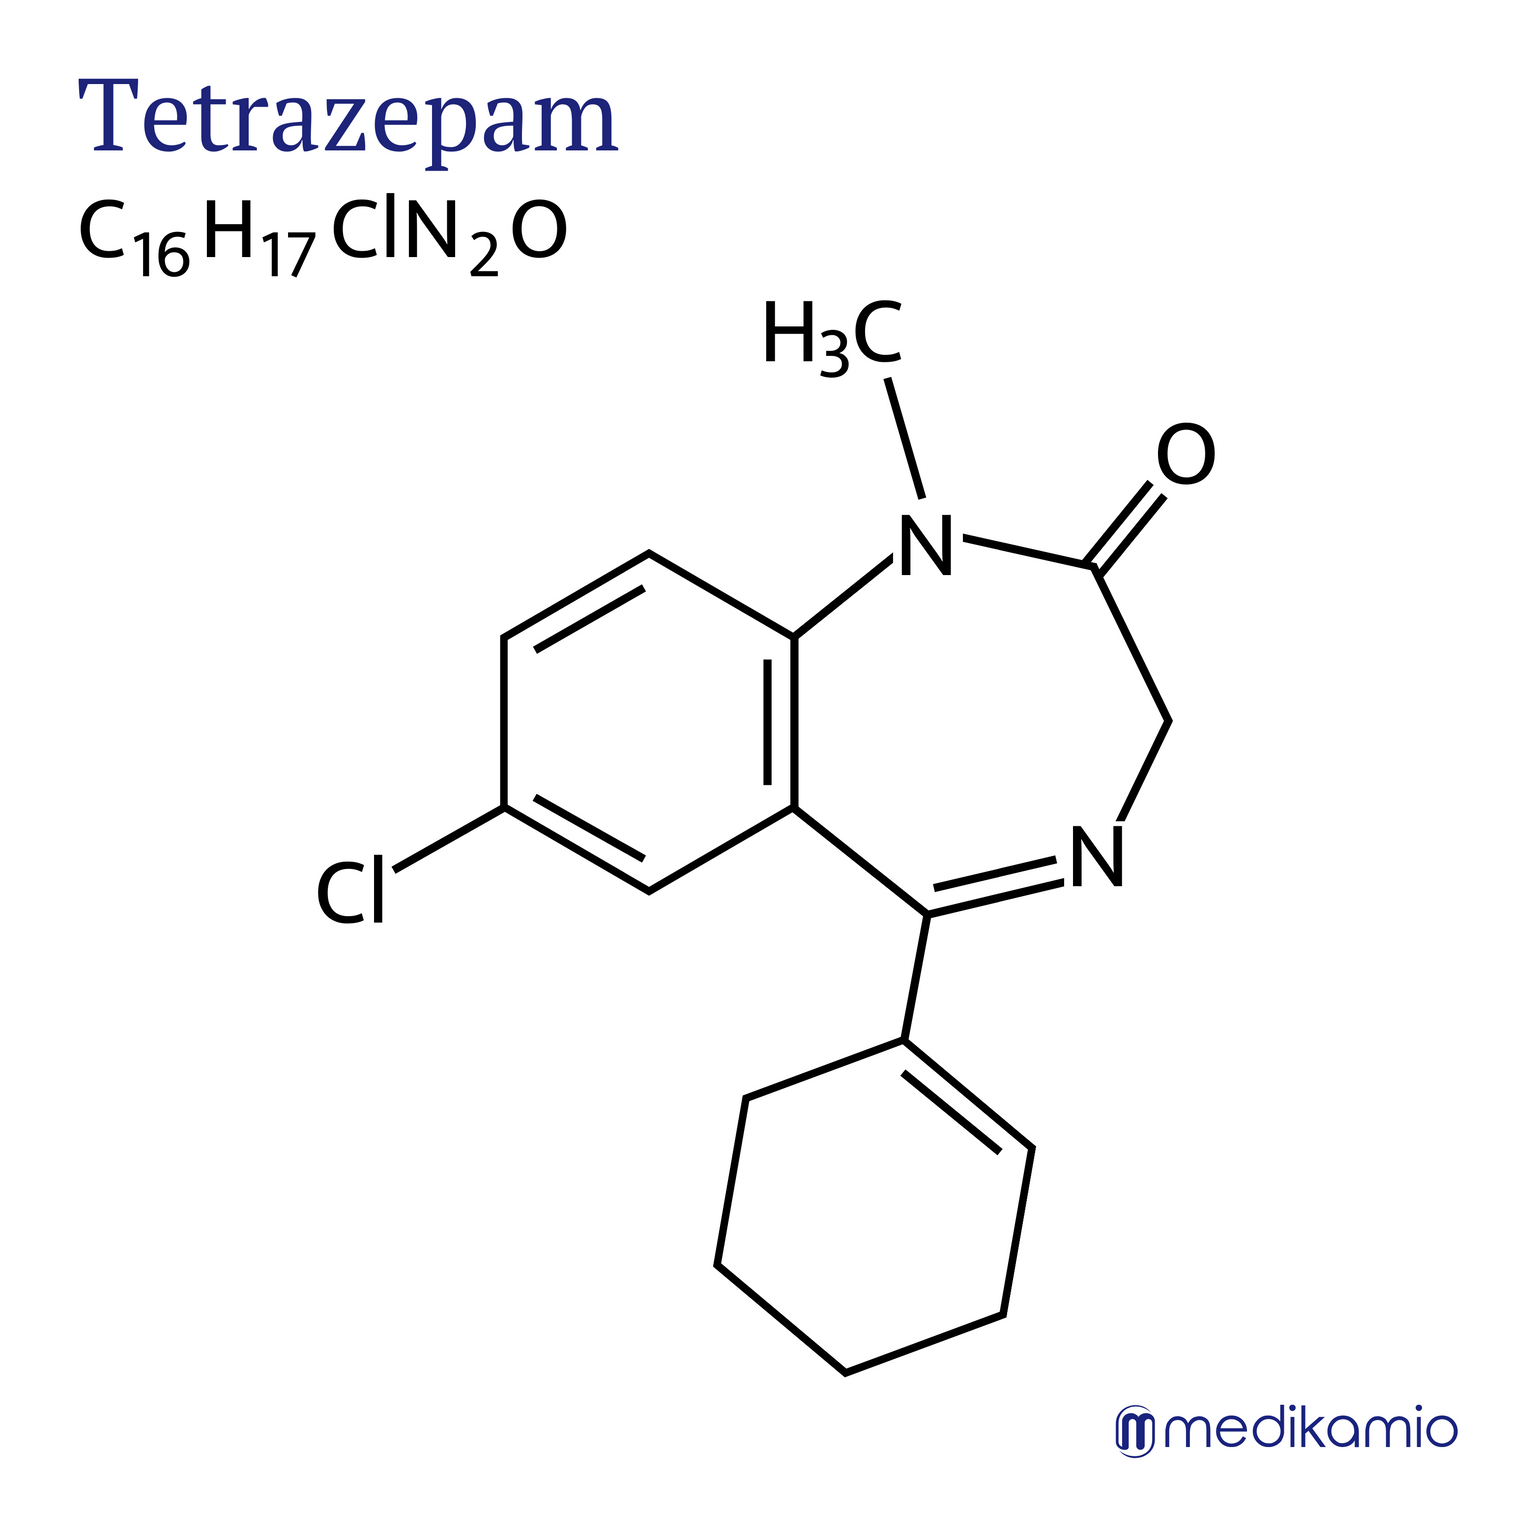 Graphic structural formula of the active substance tetrazepam